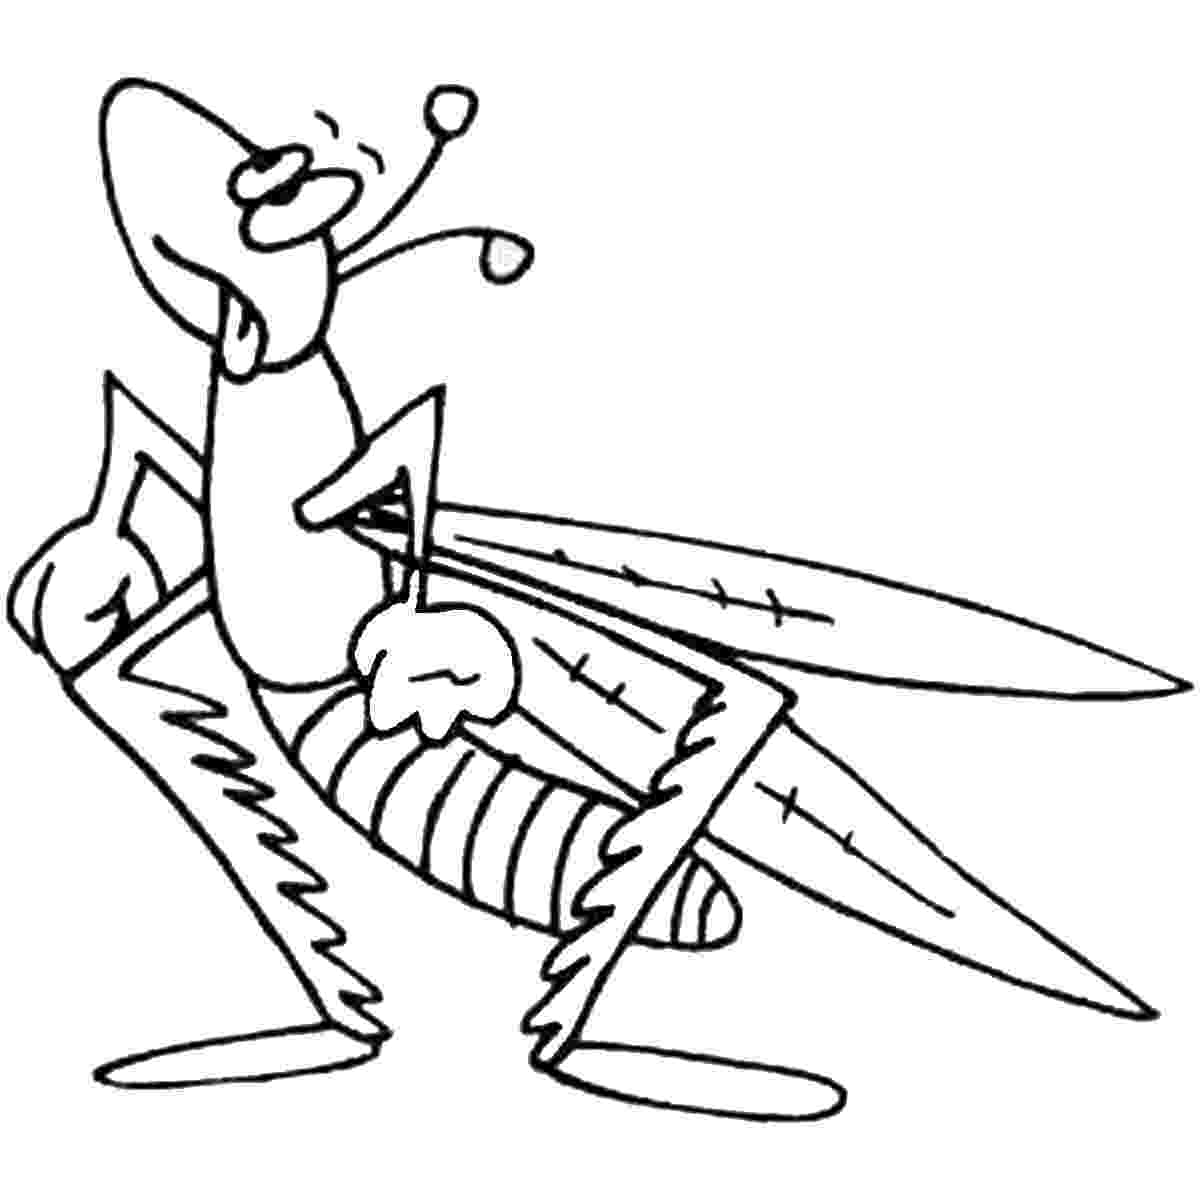 grasshopper coloring page grasshopper coloring pages for kids preschool and grasshopper page coloring 